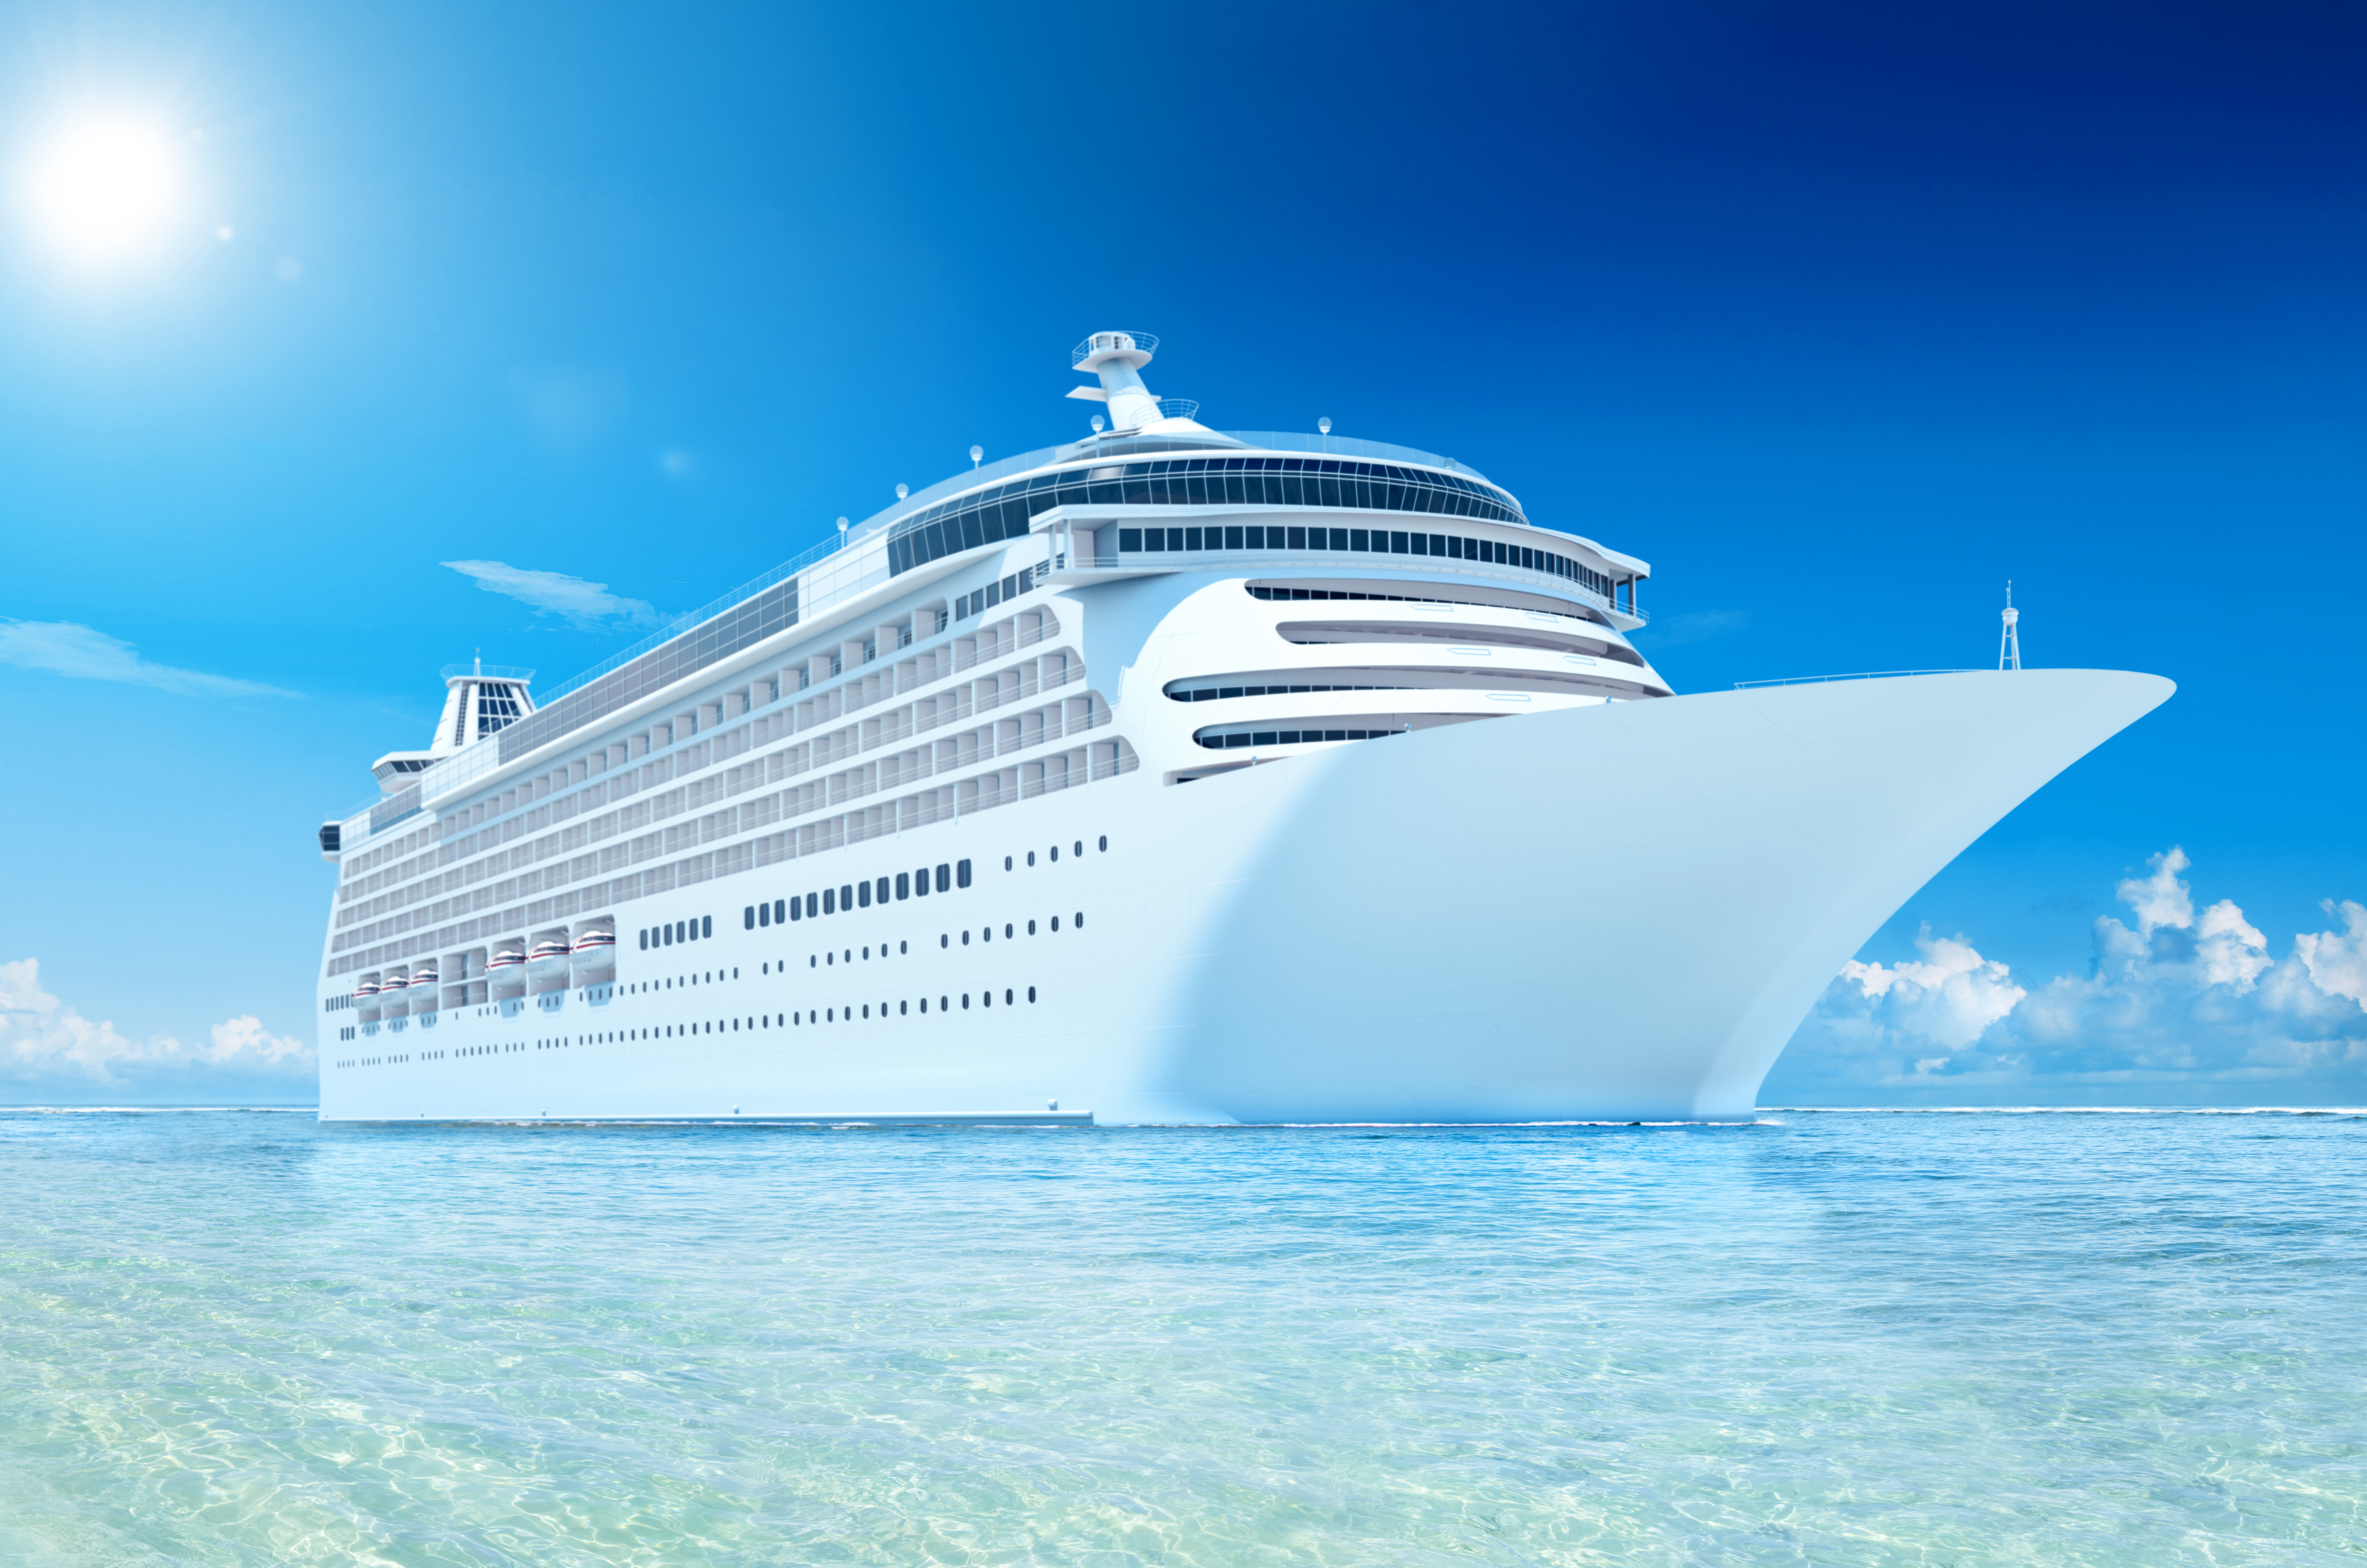 Cruise Ship Background Gallery Yopriceville High Quality